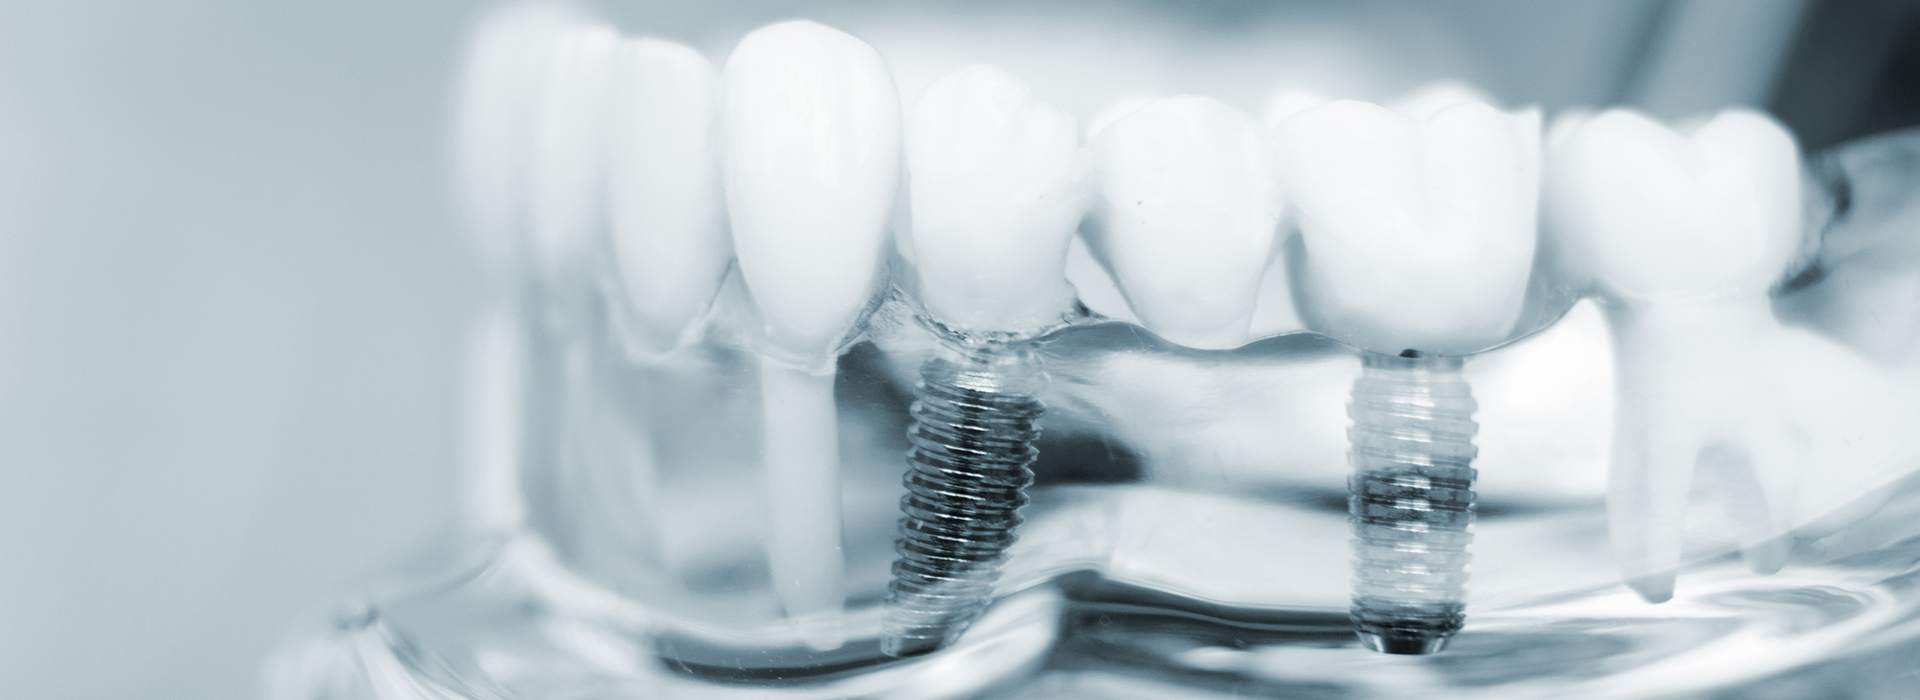 Appleseed Dental | Botox reg , Cosmetic Dentistry and Implant Dentistry